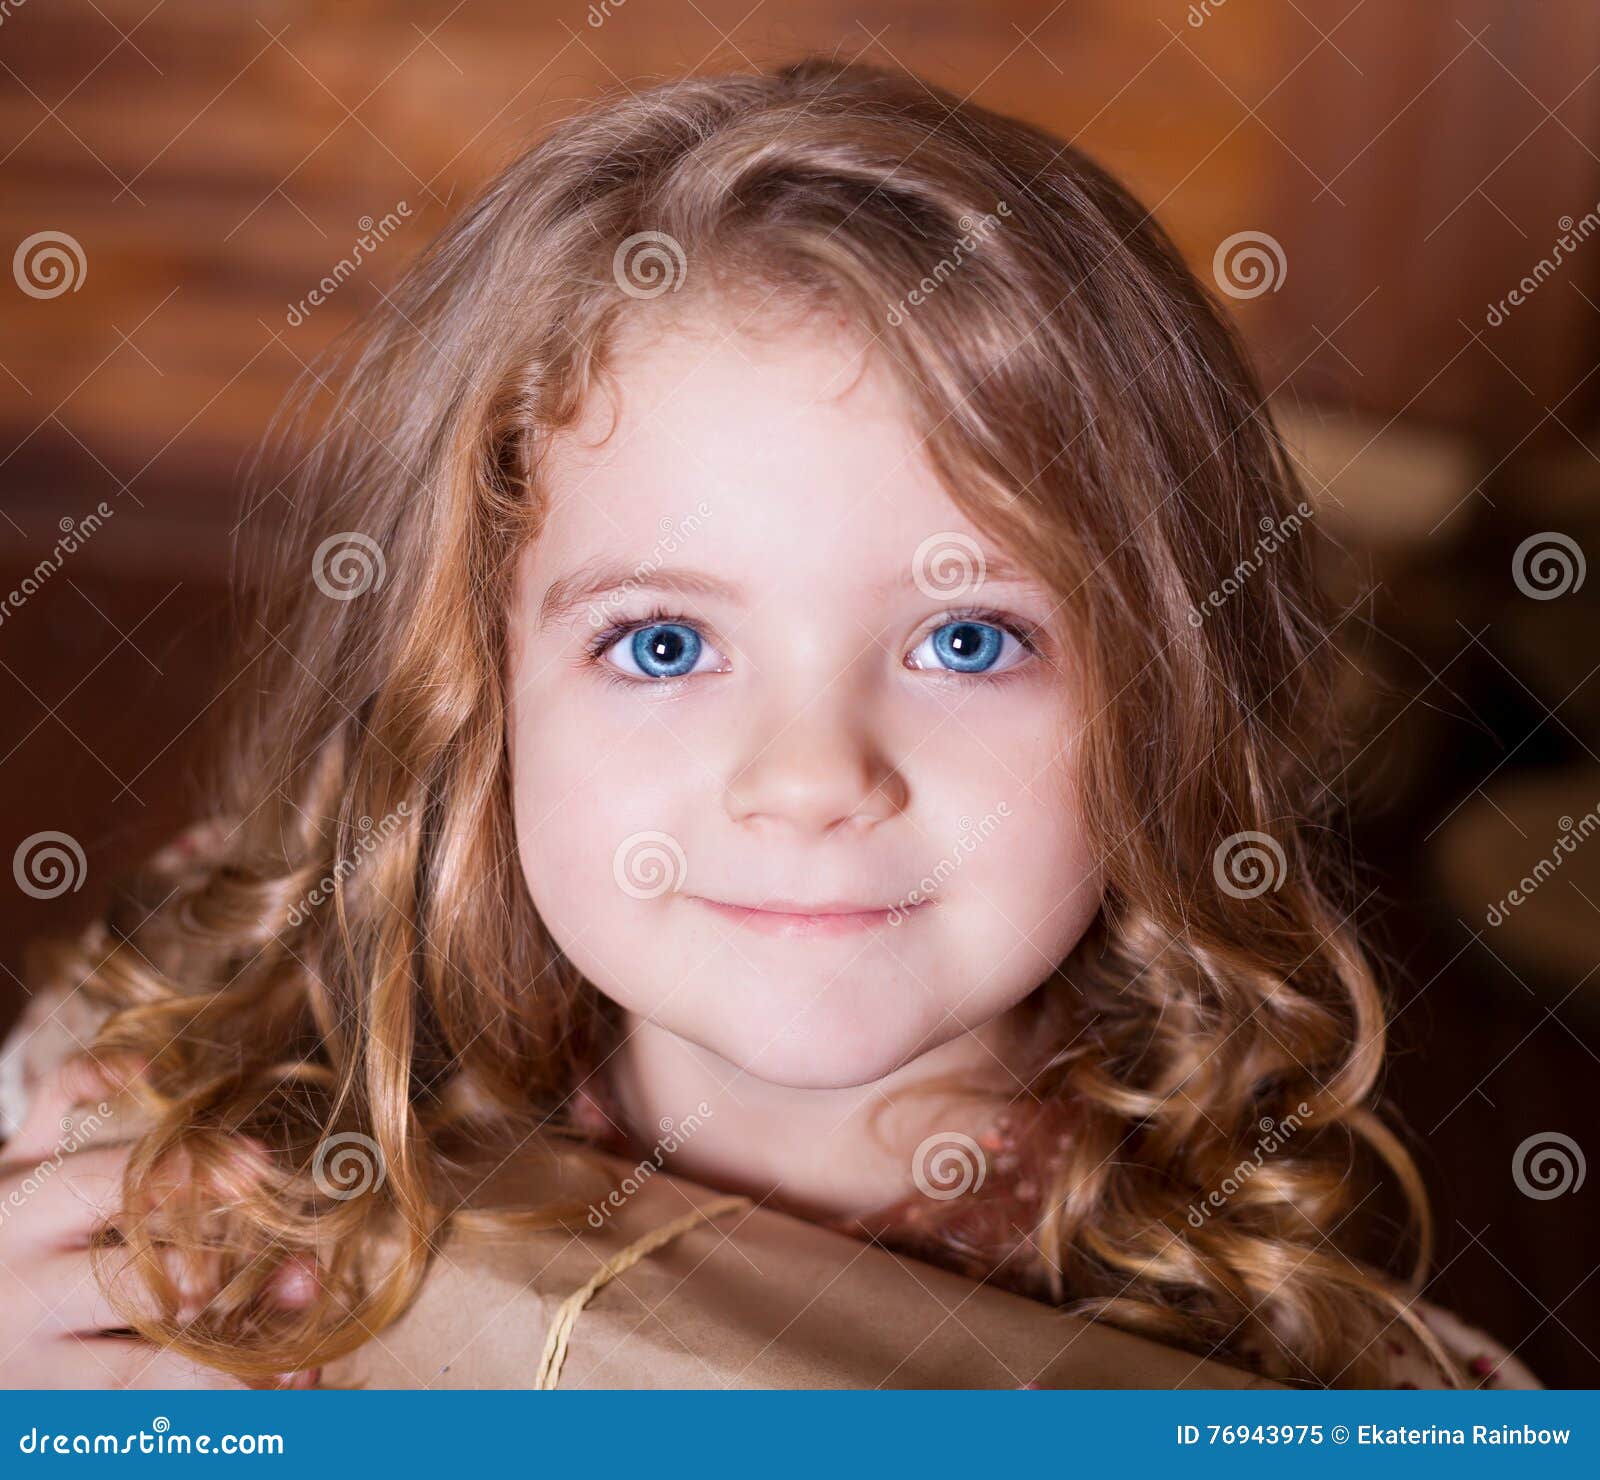 baby girl with green eyes and curly brown hair